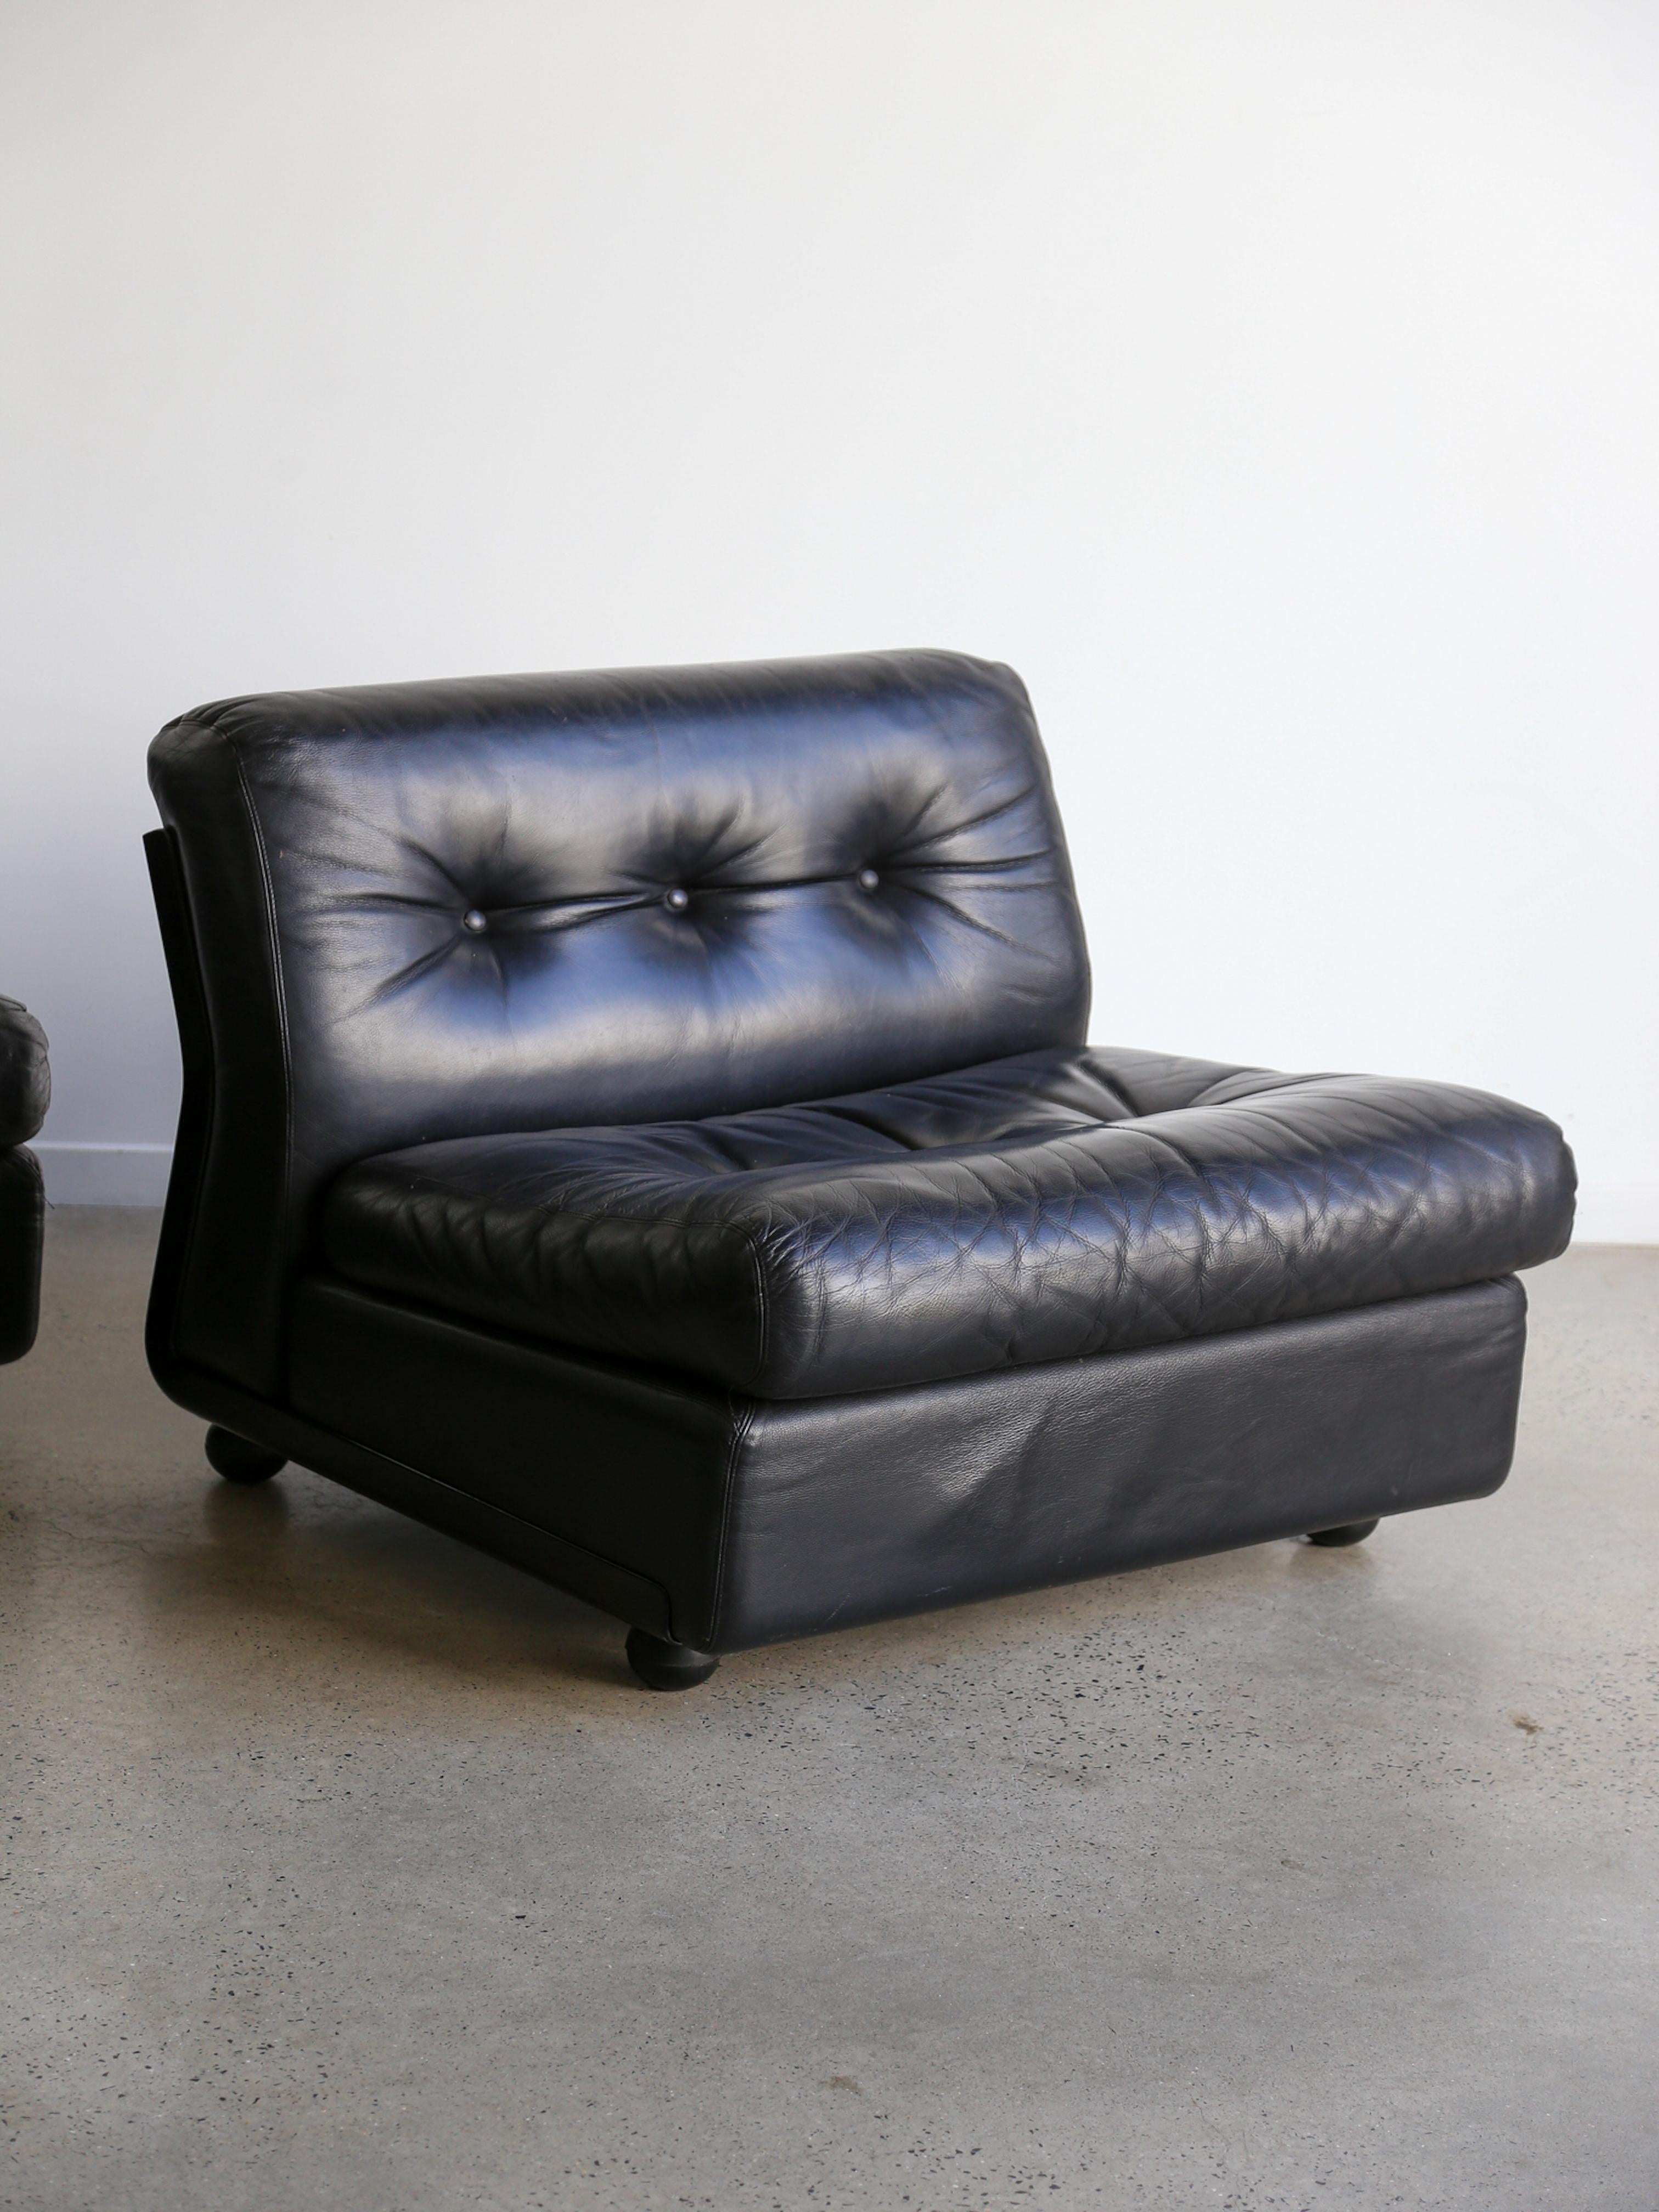 Amanta Modular Sofa in Black Leather By Mario Bellini for B&B Italia 1970 In Good Condition For Sale In Byron Bay, NSW